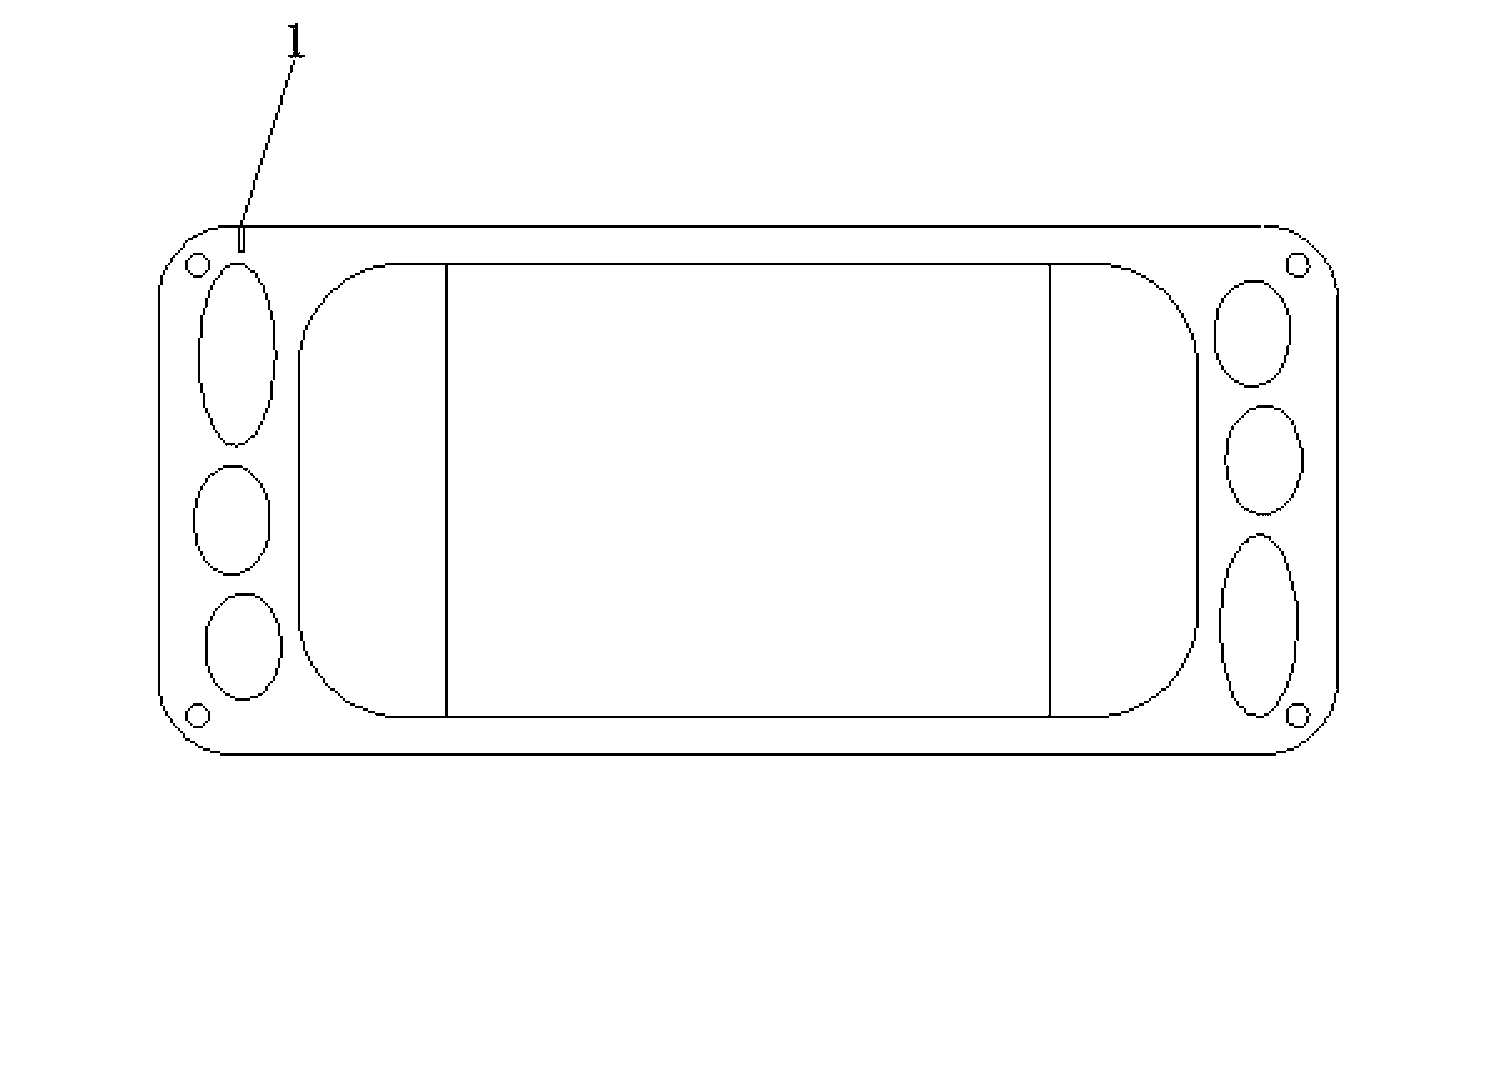 Connecting method of inspecting lines of metal bipolar plate fuel cell stack